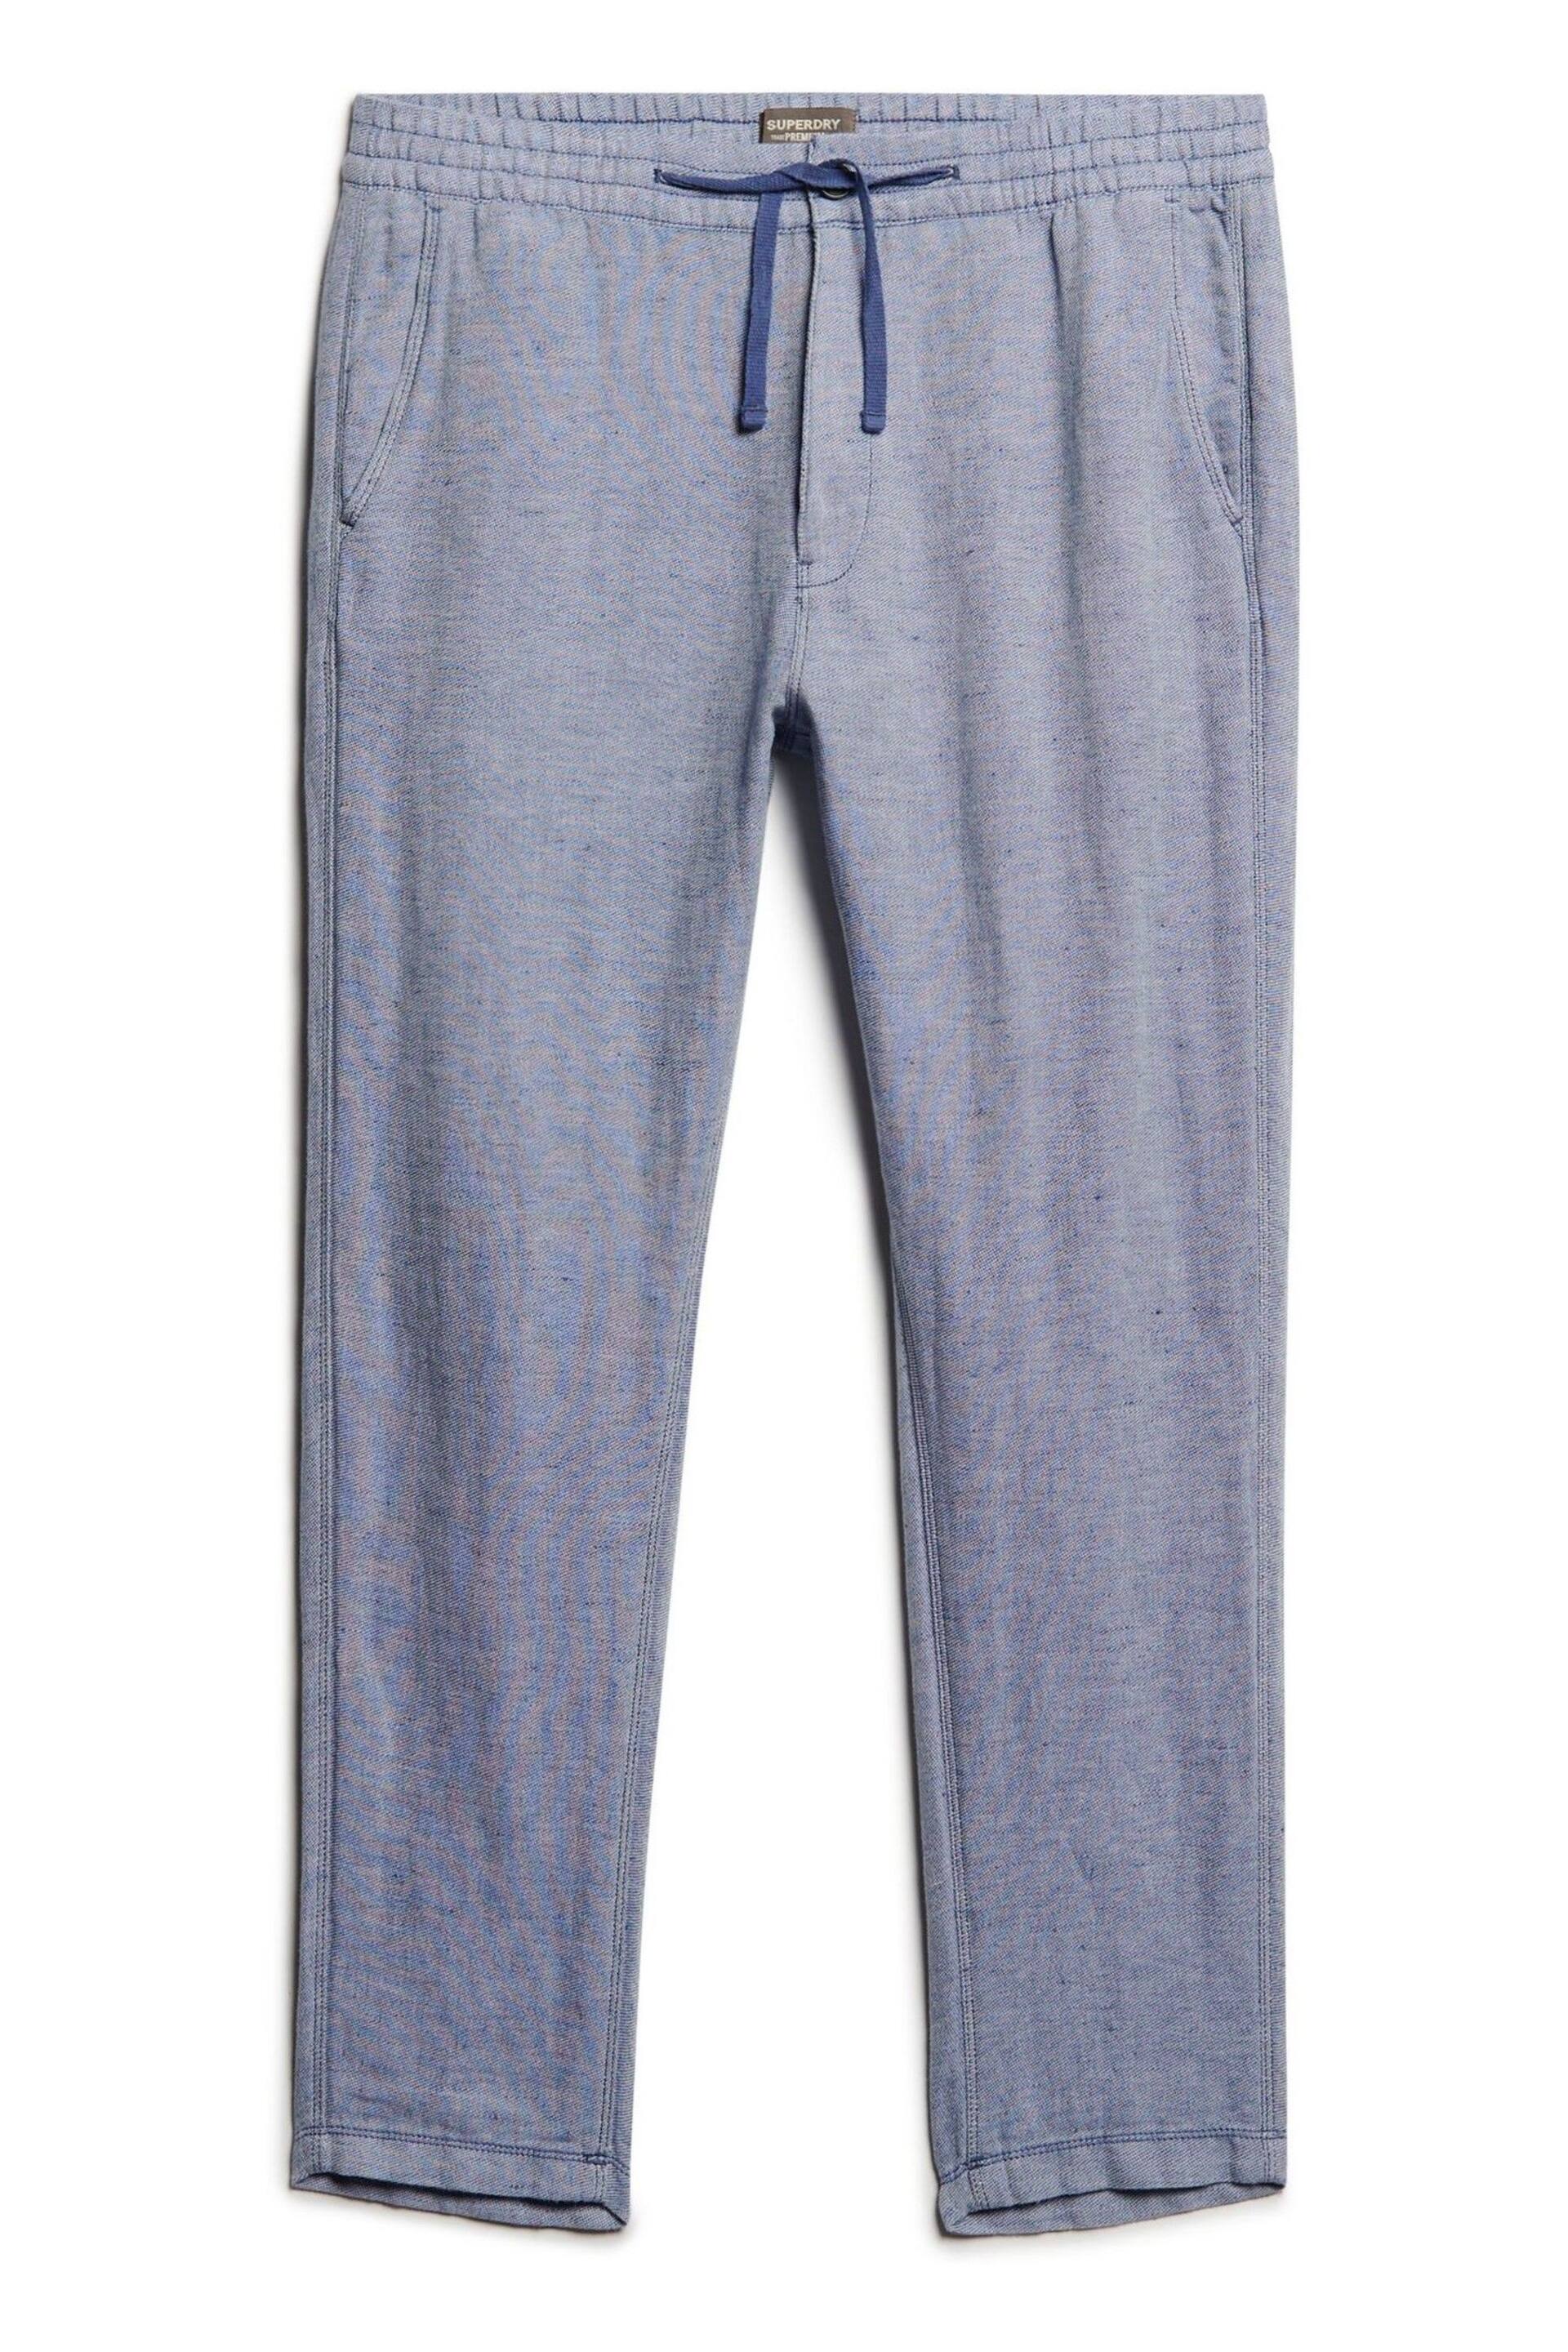 Superdry Blue Drawstring Linen Trousers - Image 4 of 6